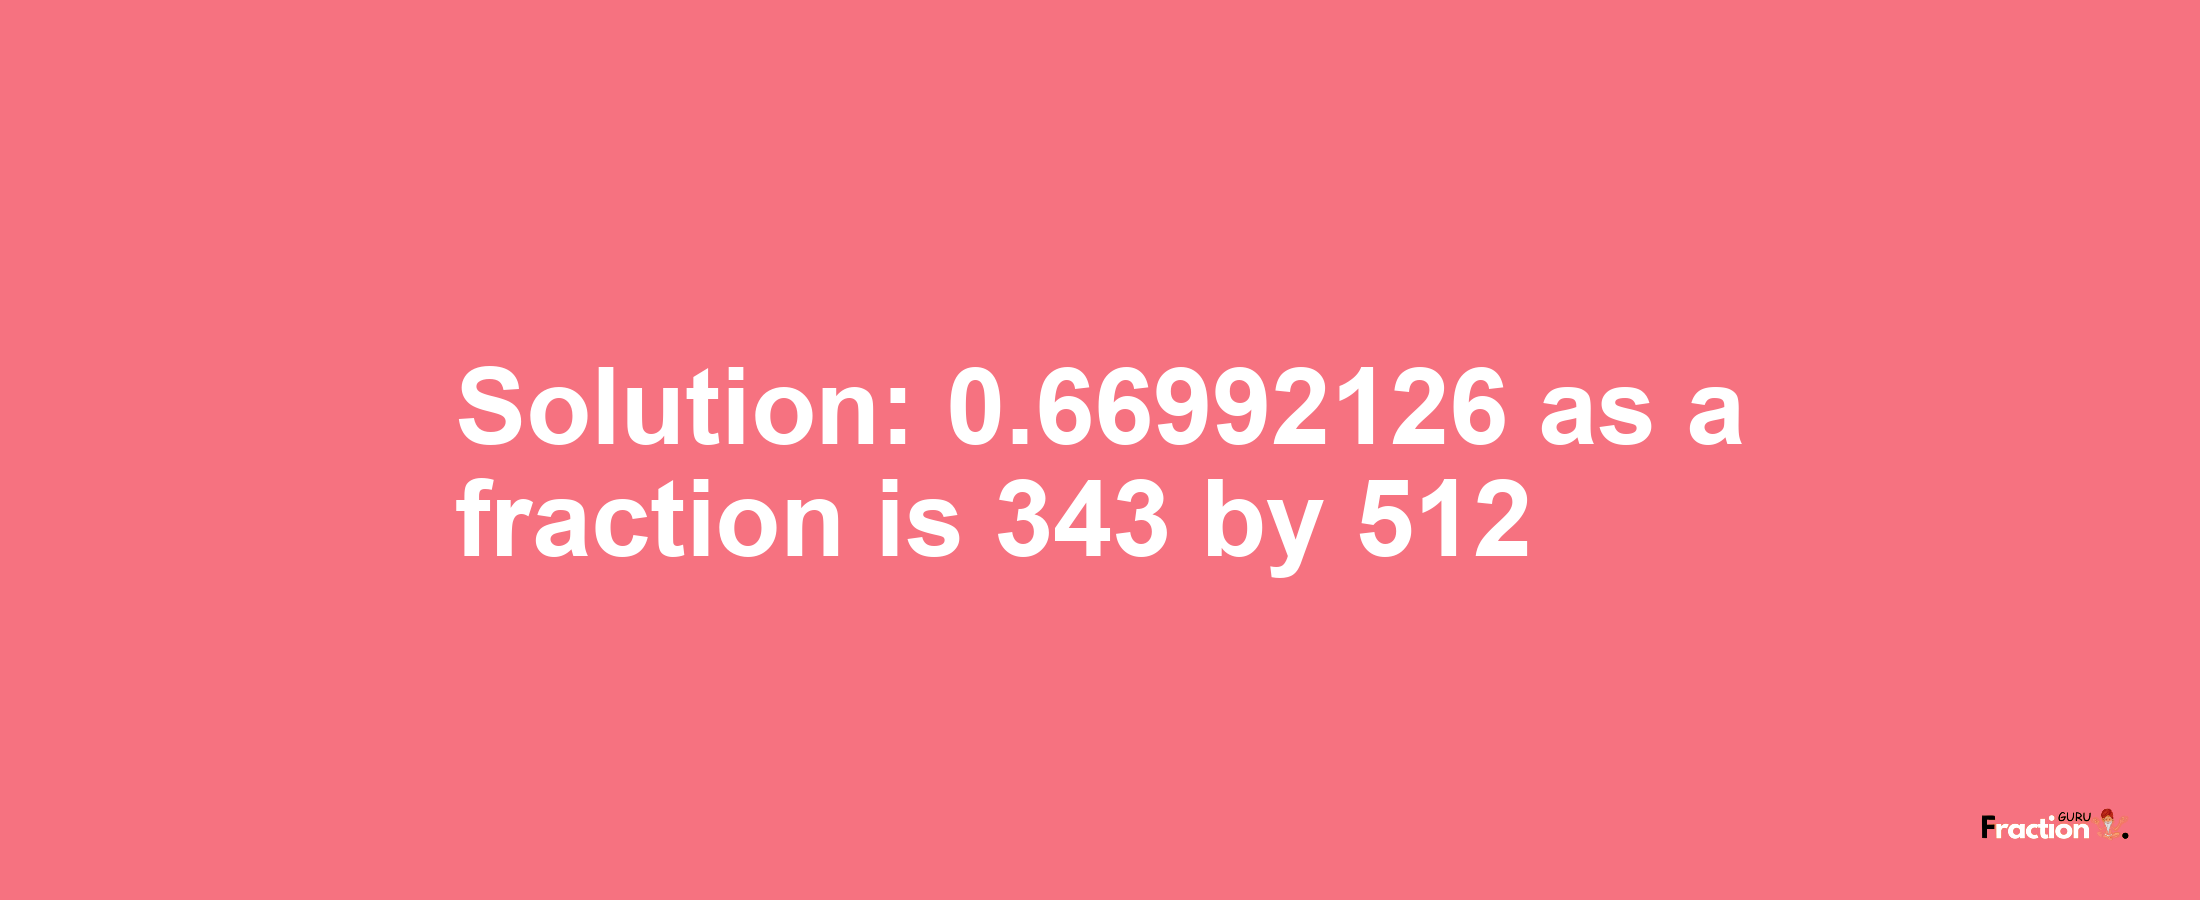 Solution:0.66992126 as a fraction is 343/512